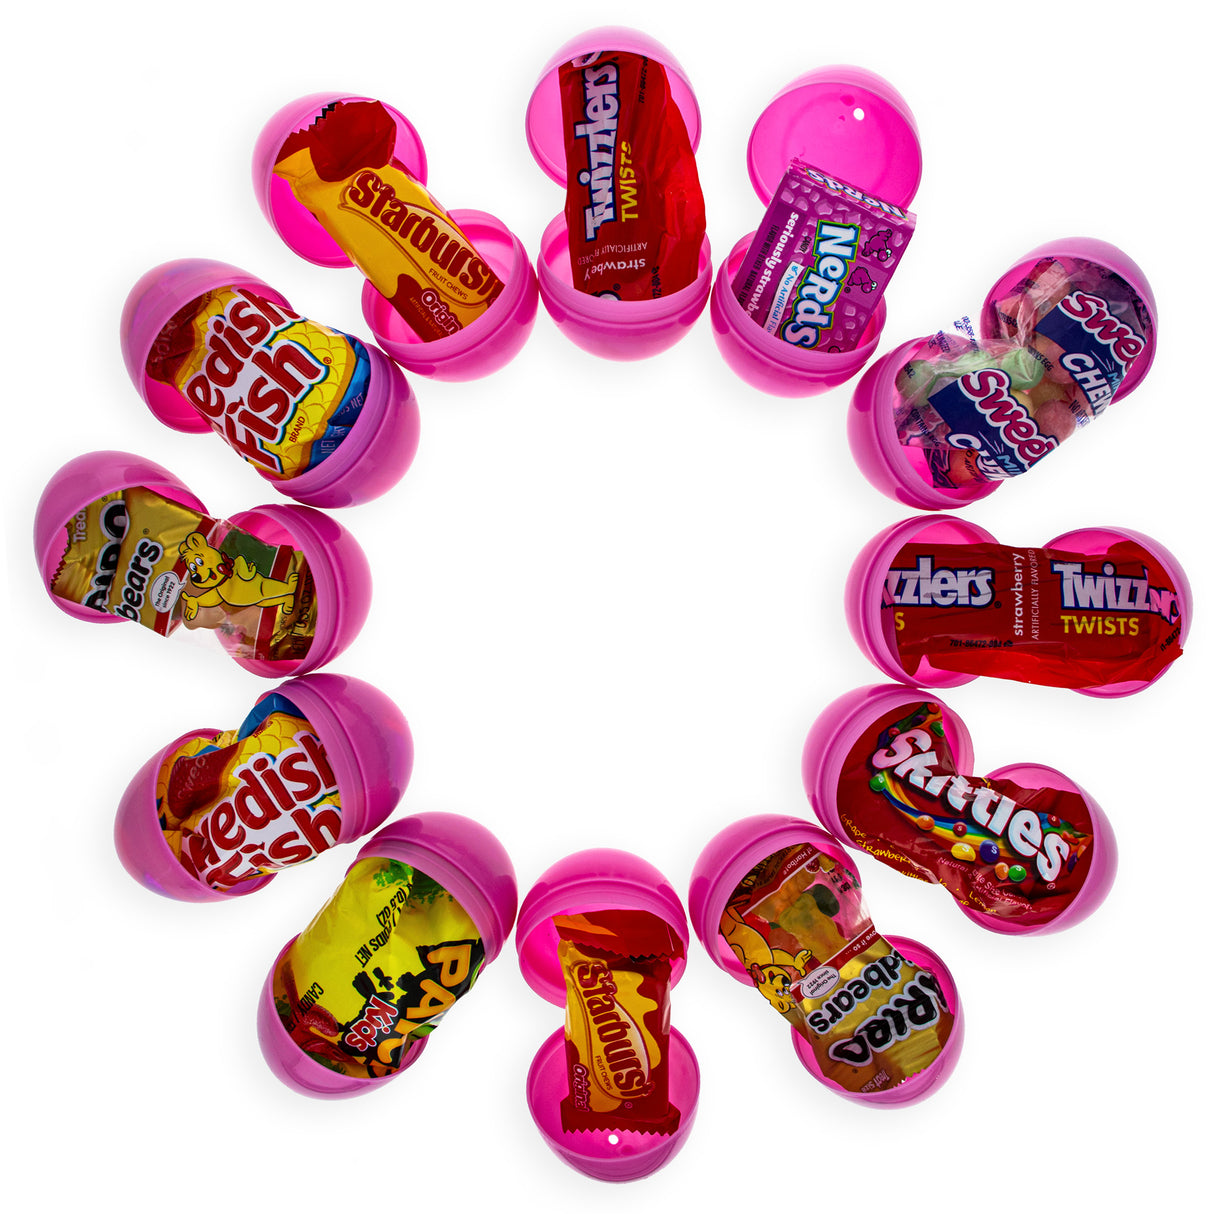 Plastic Set of 12 Delightful Candy-Filled Pink Easter Eggs 2.25 Inches in Pink color Oval